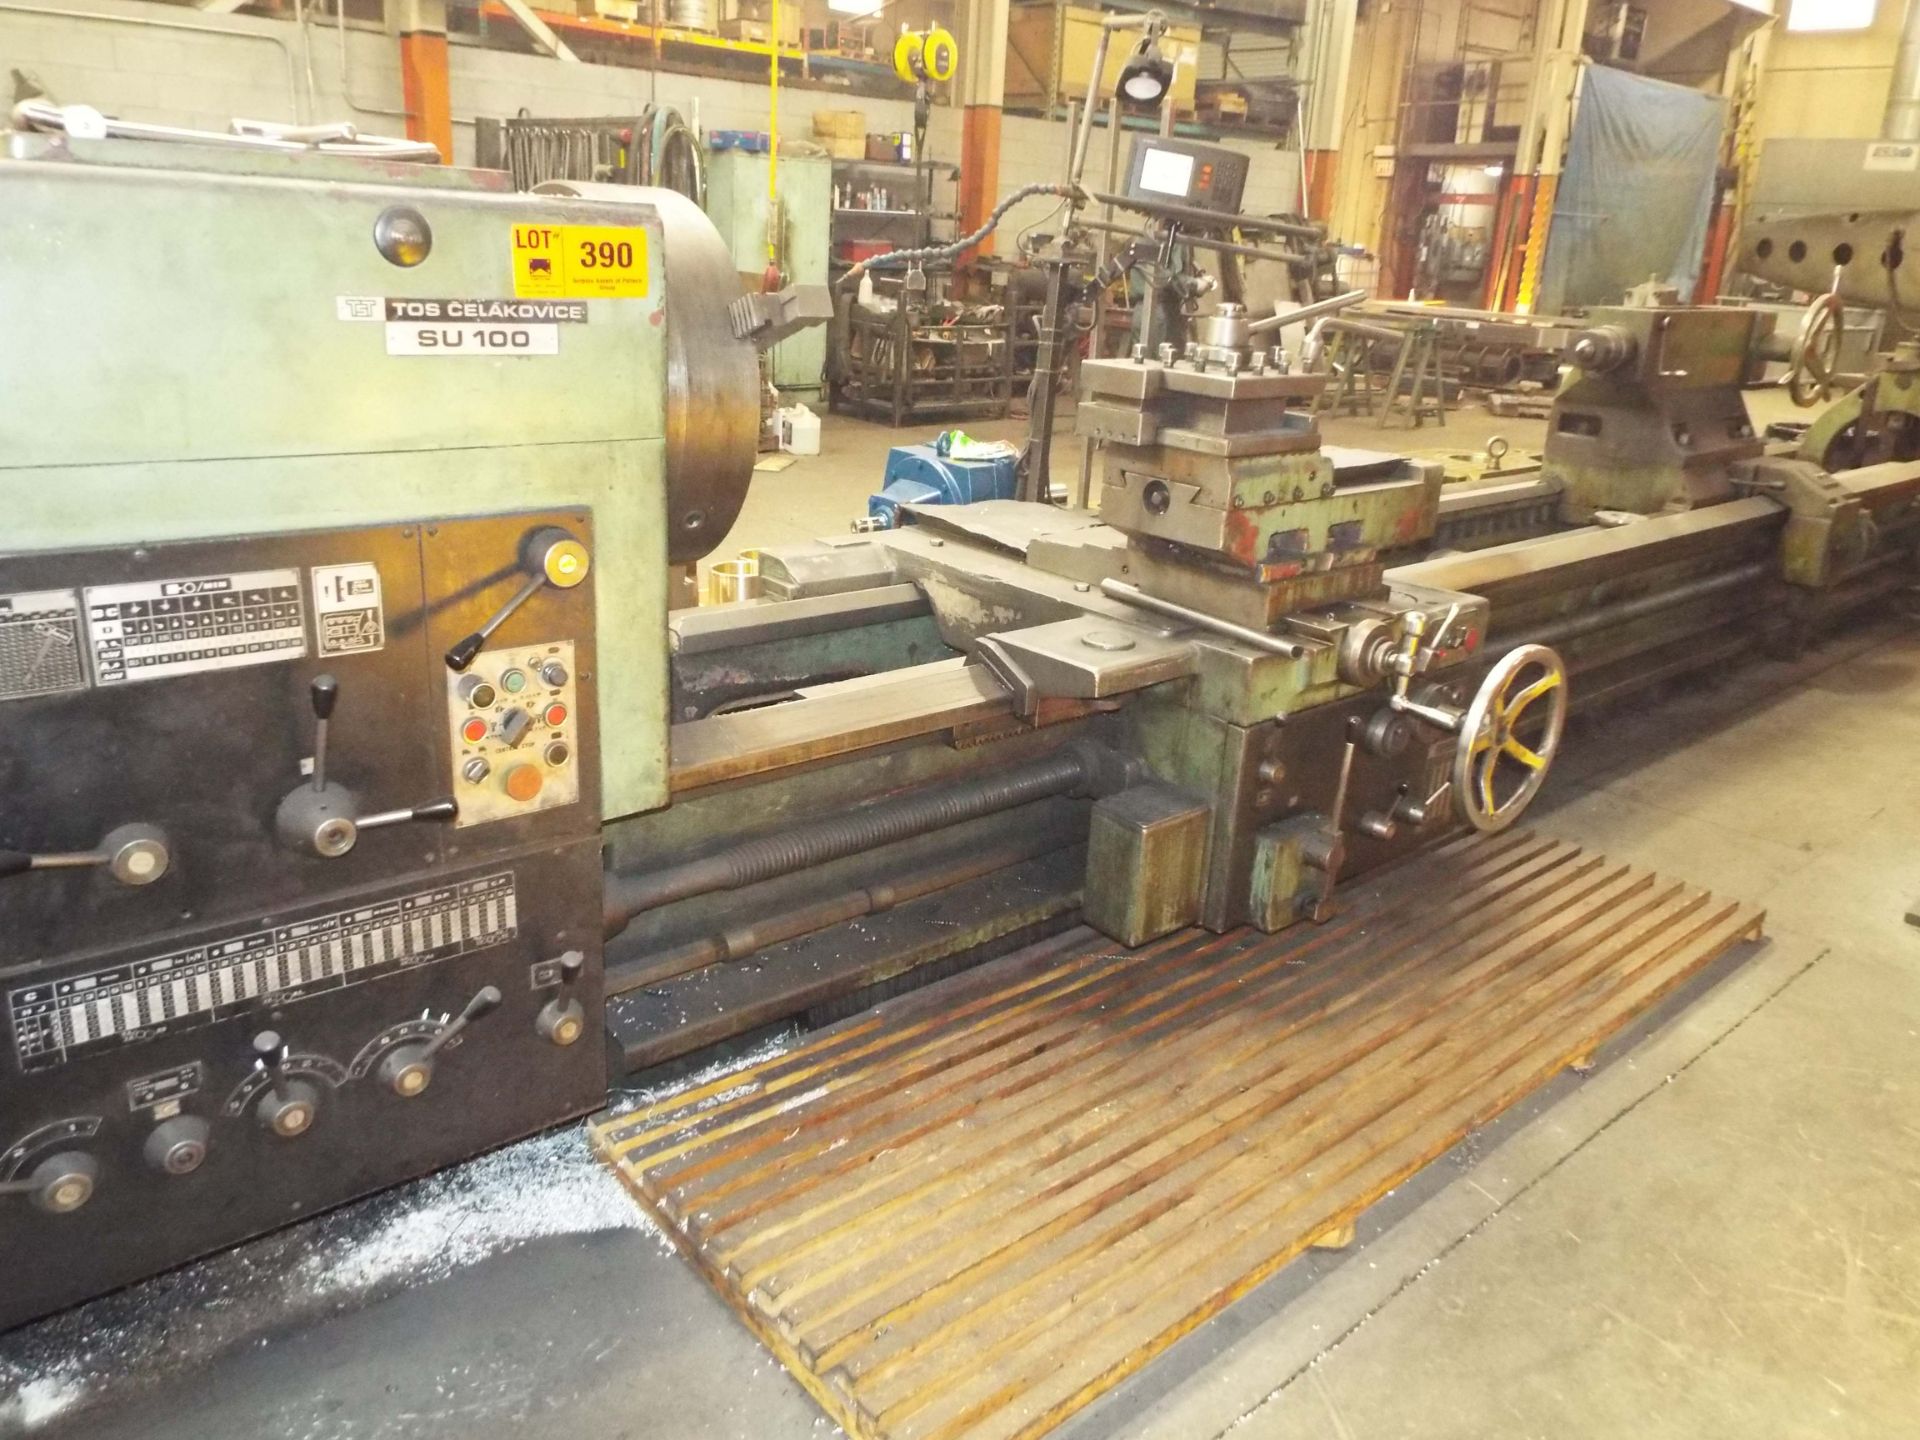 TOS CELAKOVICE SU100 LATHE WITH 48" SWING OVER BED, 204" DISTANCE BETWEEN CENTERS, 4" SPINDLE